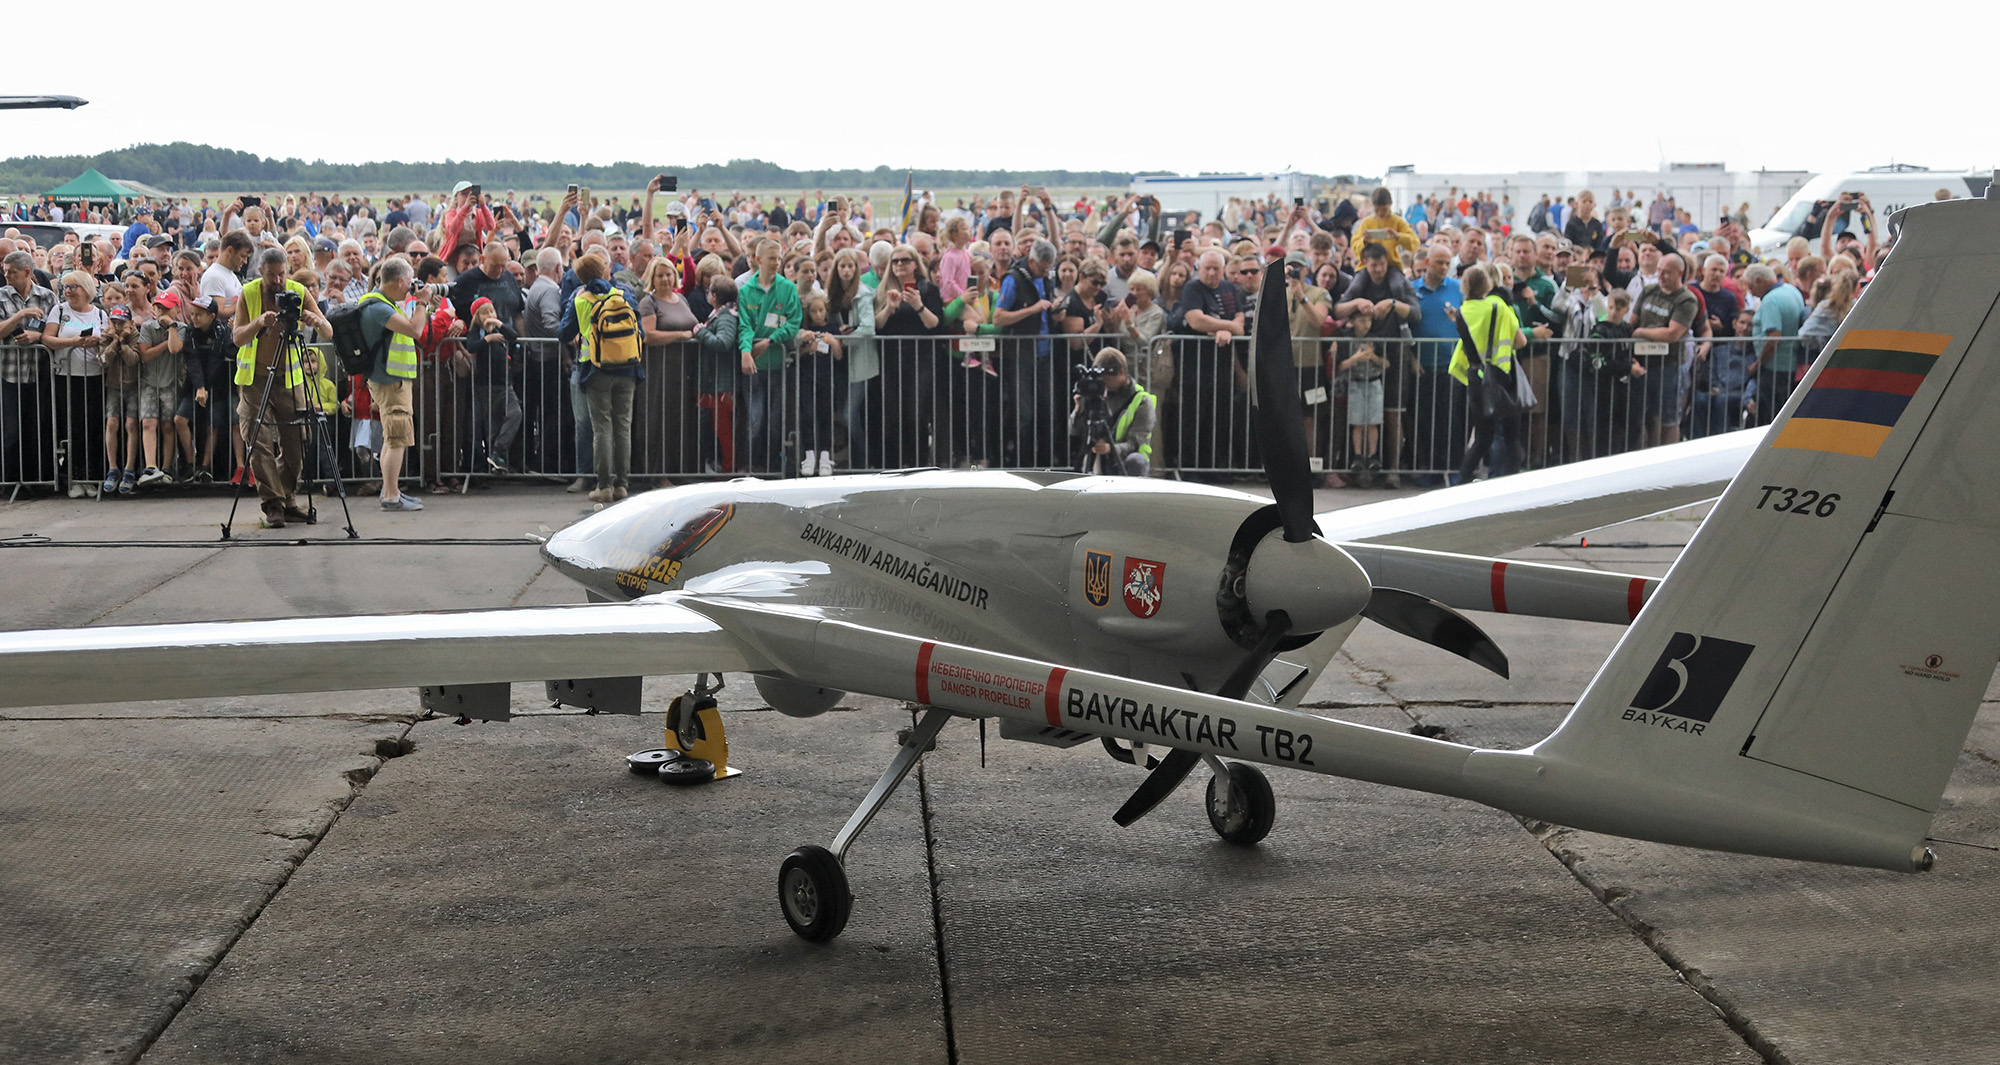 A crowdfunded Turkish-made Bayraktar TB2 combat drone is on view during a presentation at the Lithuanian Air Force Base in Siauliai, Lithuania, on July 6.